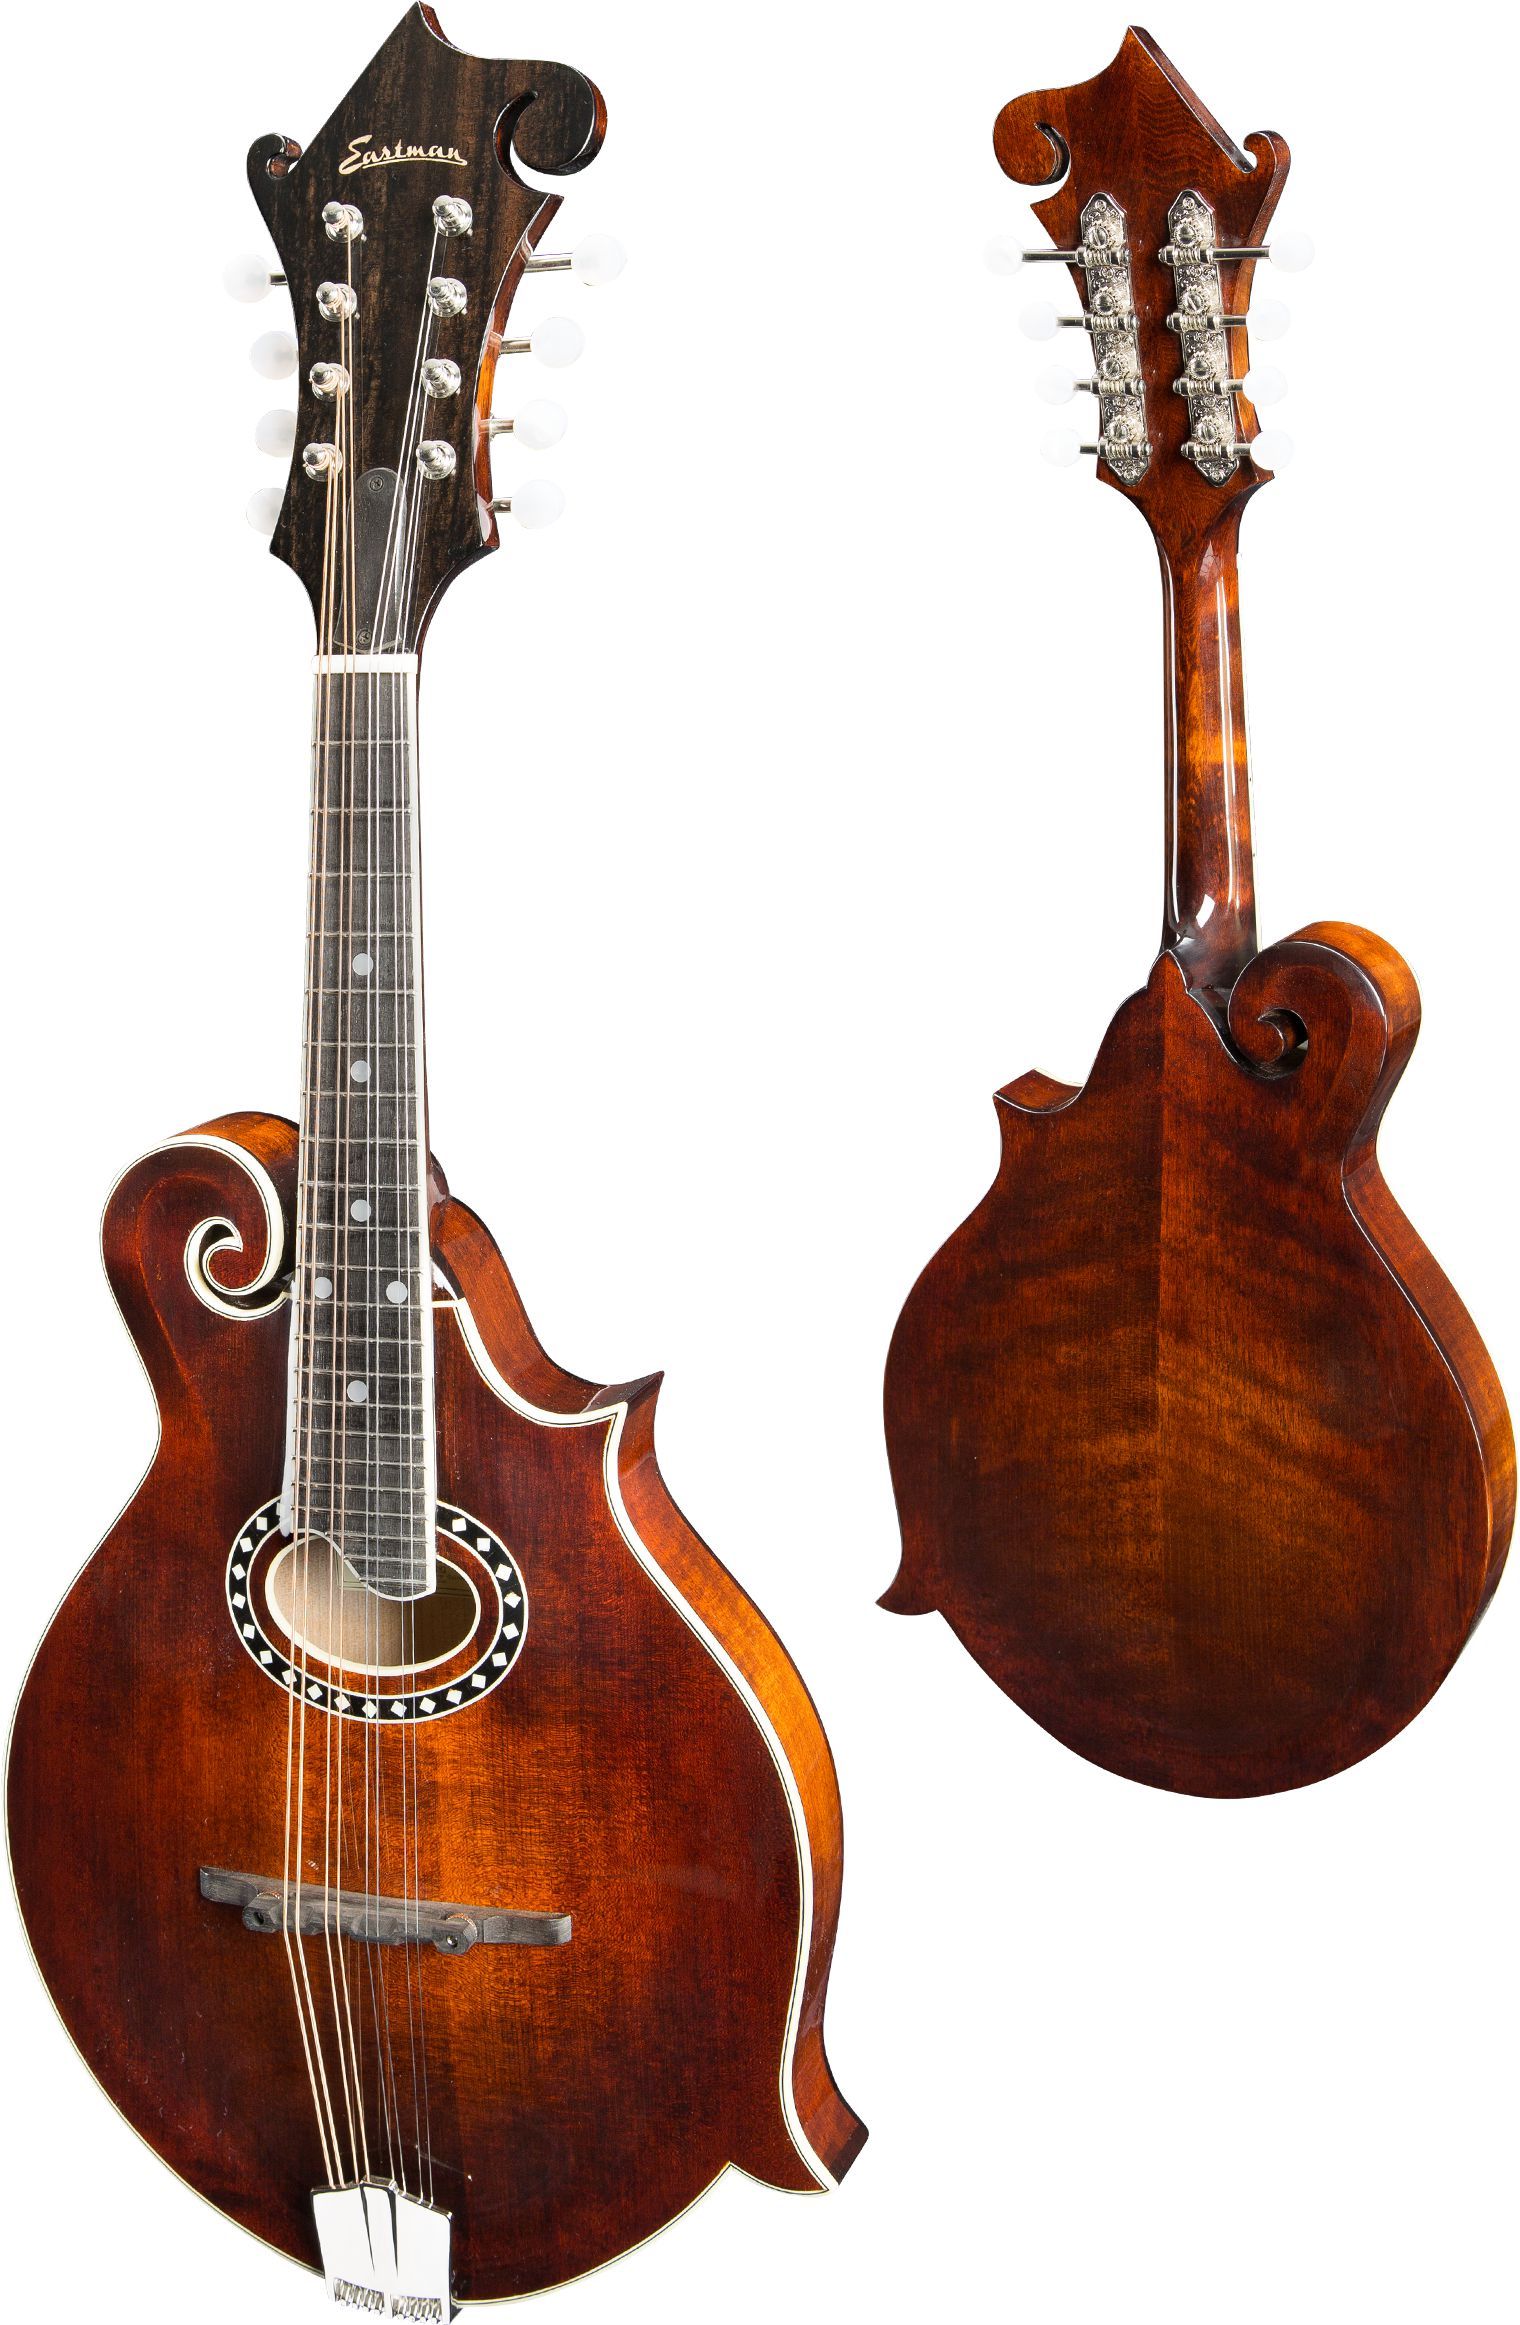 Eastman MD514 F-style Mandolin (oval hole, Solid Spruce top, Solid Maple back and sides, w/Case), Mandolin for sale at Richards Guitars.